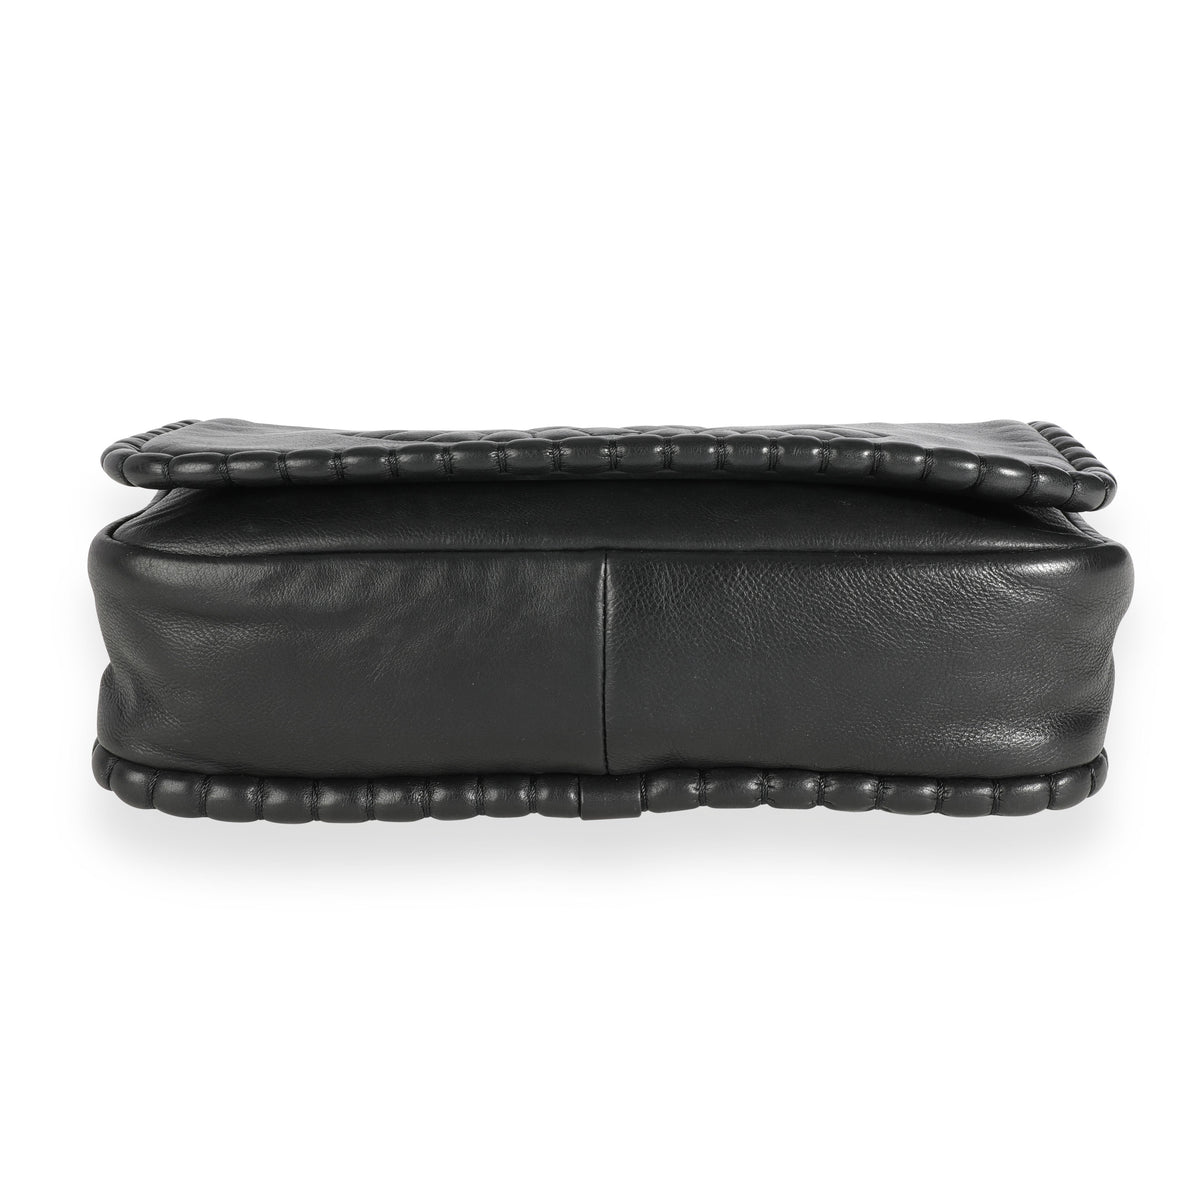 Chanel Black Leather Pleated CC Flap Bag